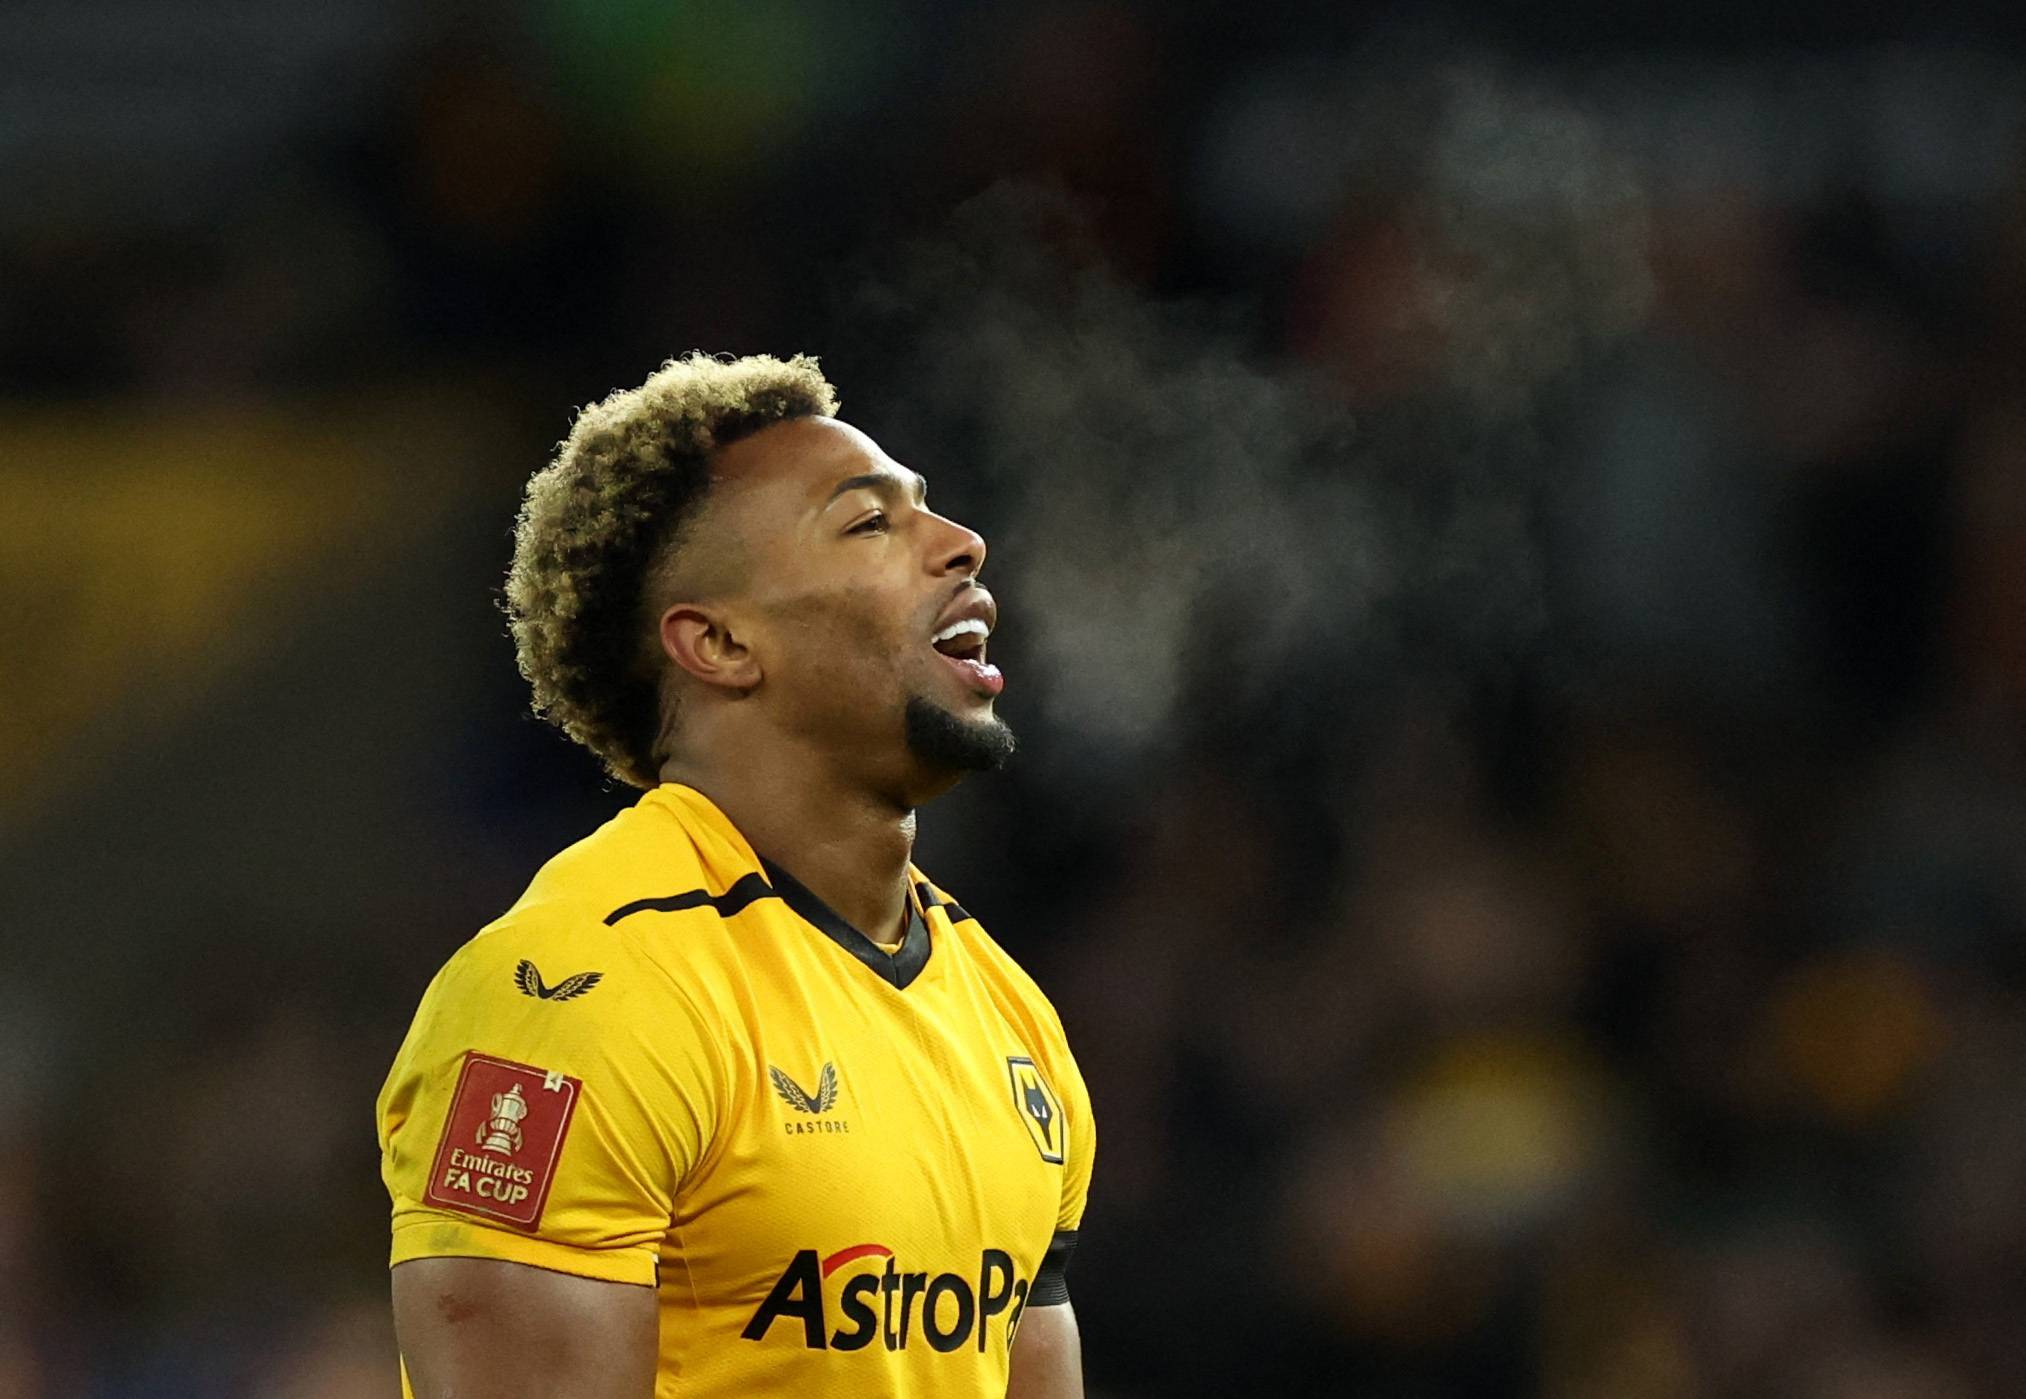 Wolves: Update on Adama Traore's future - Follow up